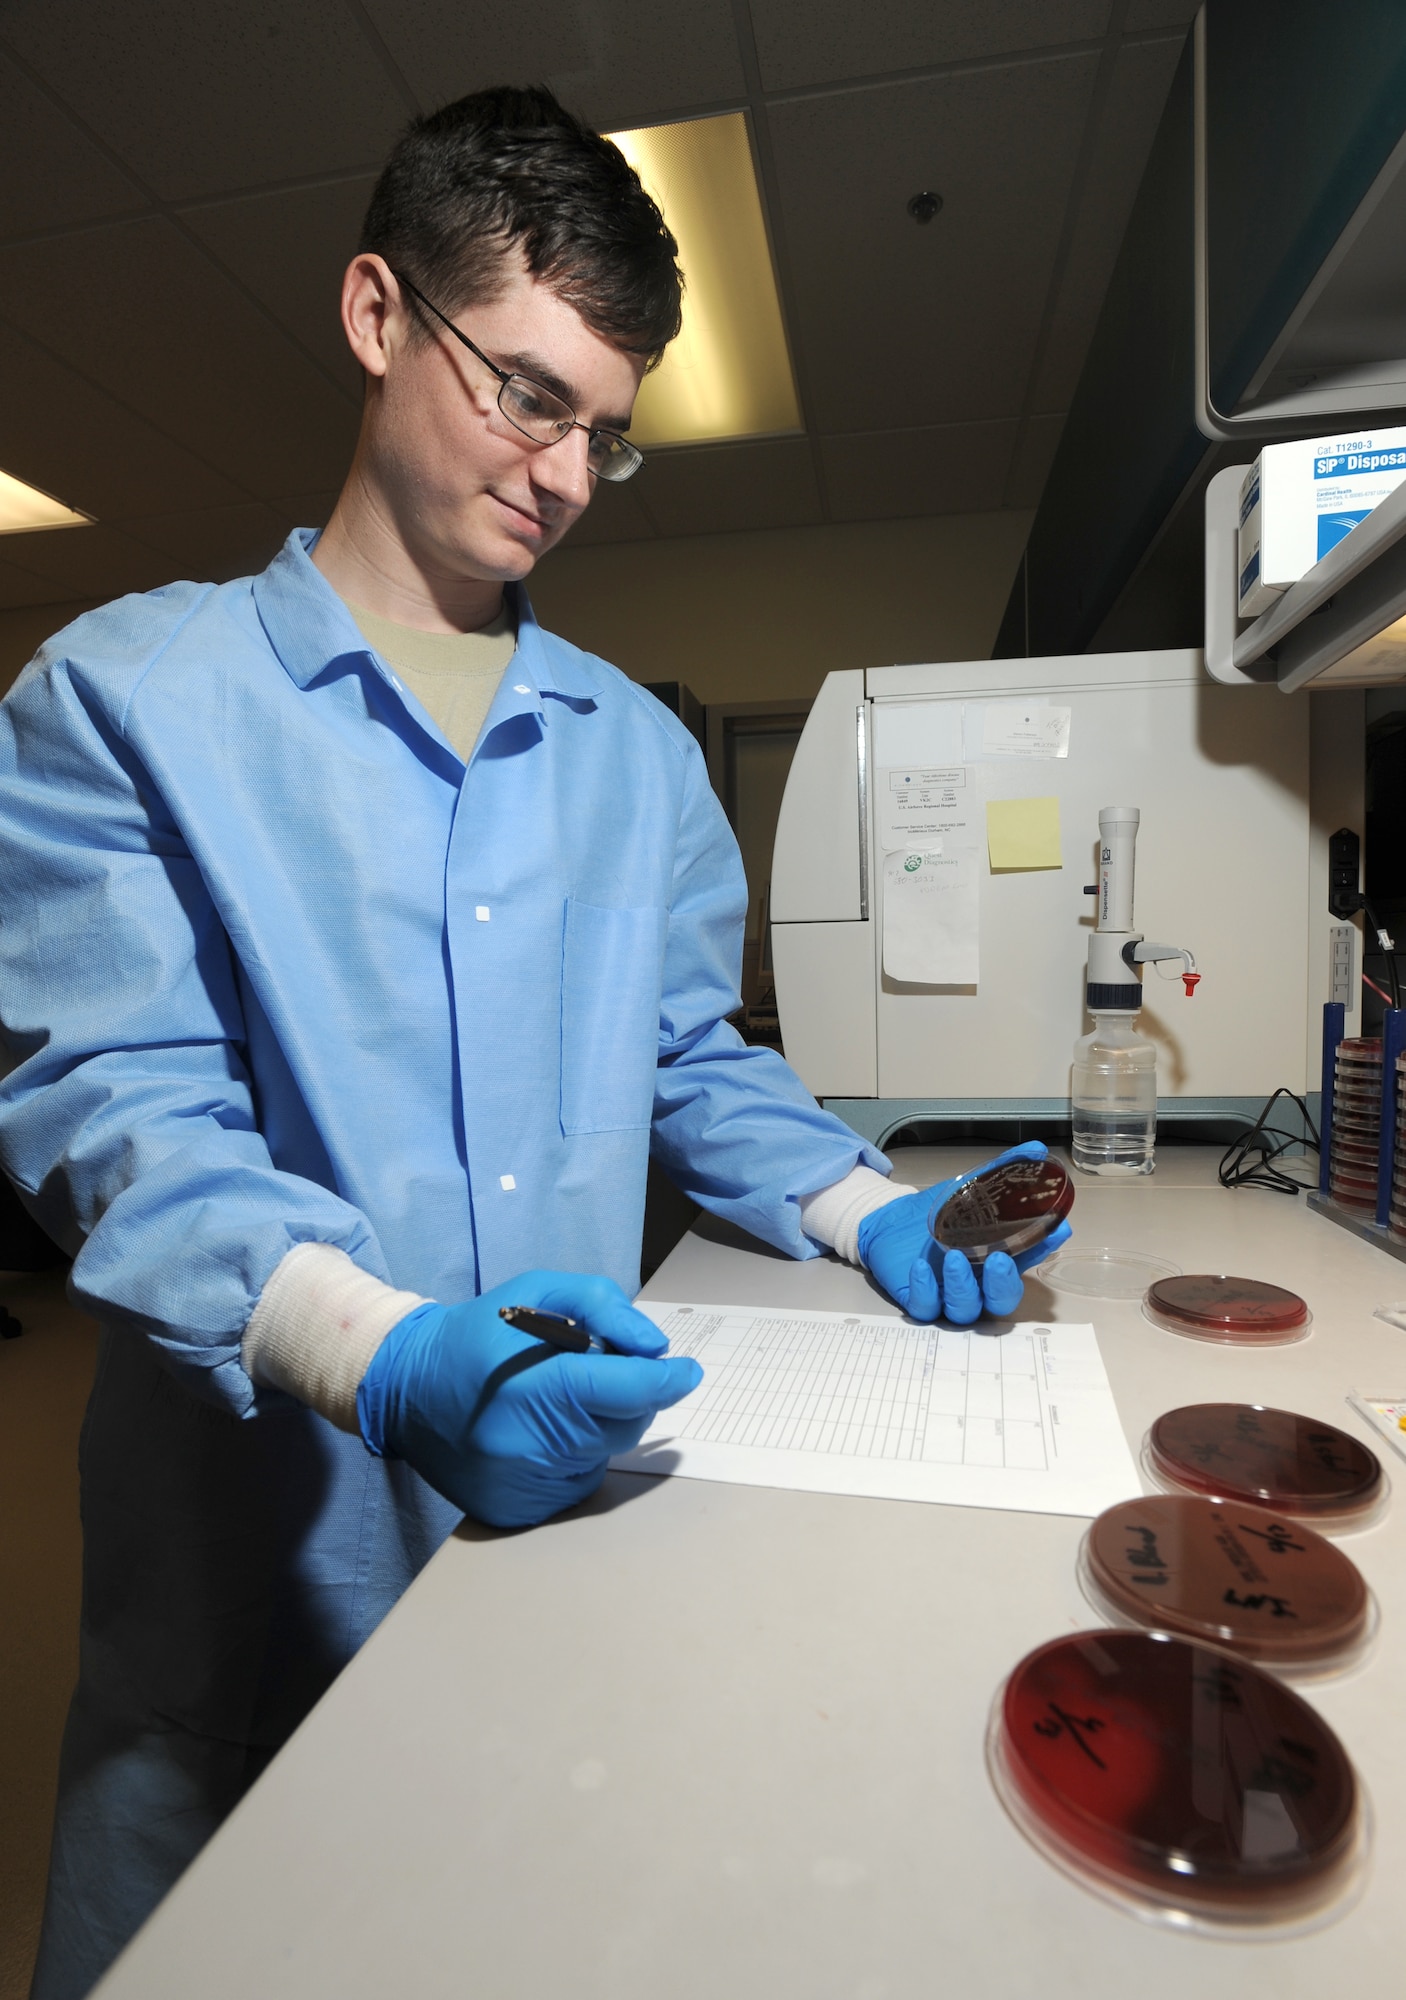 ELMENDORF AIR FORCE BASE, Alaska-- Airman 1st Class Nathan Knox of 3 Medical Support Squadron examines bacteria samples on April 15, 2009. His important role as a lab technician helps to provide proper diagnoses of diseases. (U.S. Air Force photo by Airman First Class Kristin High)